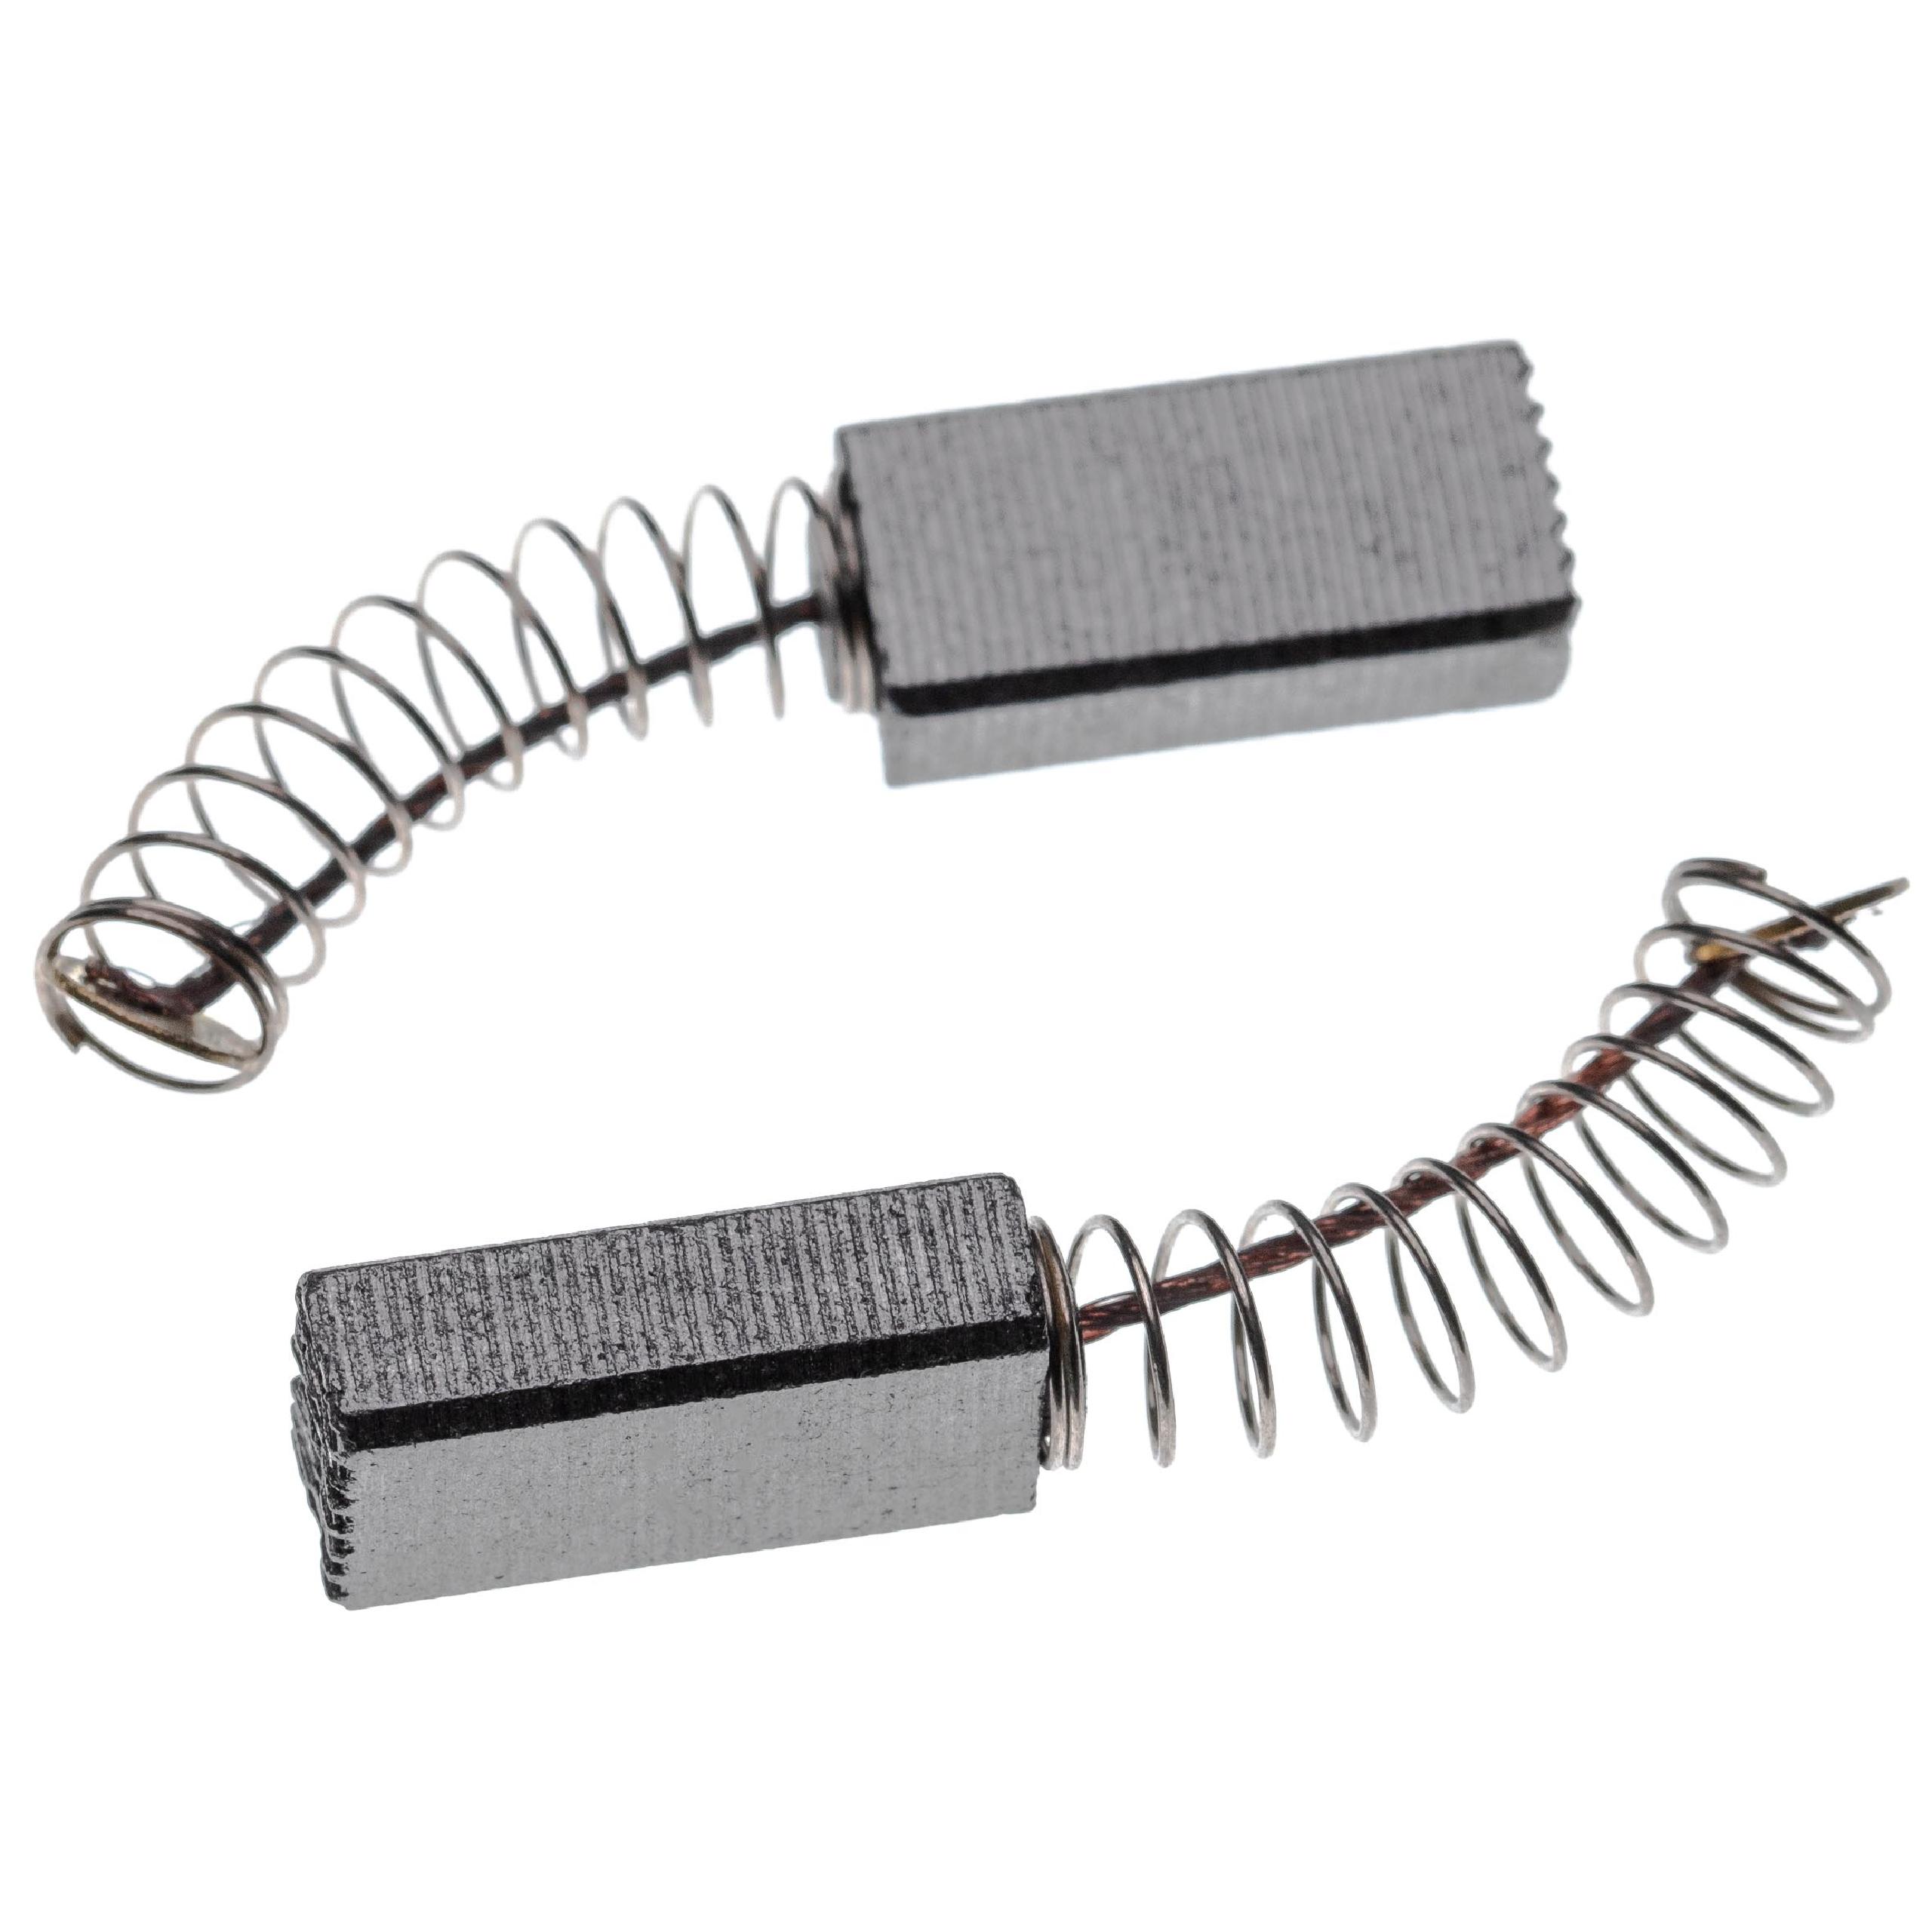 2x Carbon Brush as Replacement for Bosch 2604321905, 1607014117 Electric Power Tools + Spring, 5 x 8 x 16.5mm